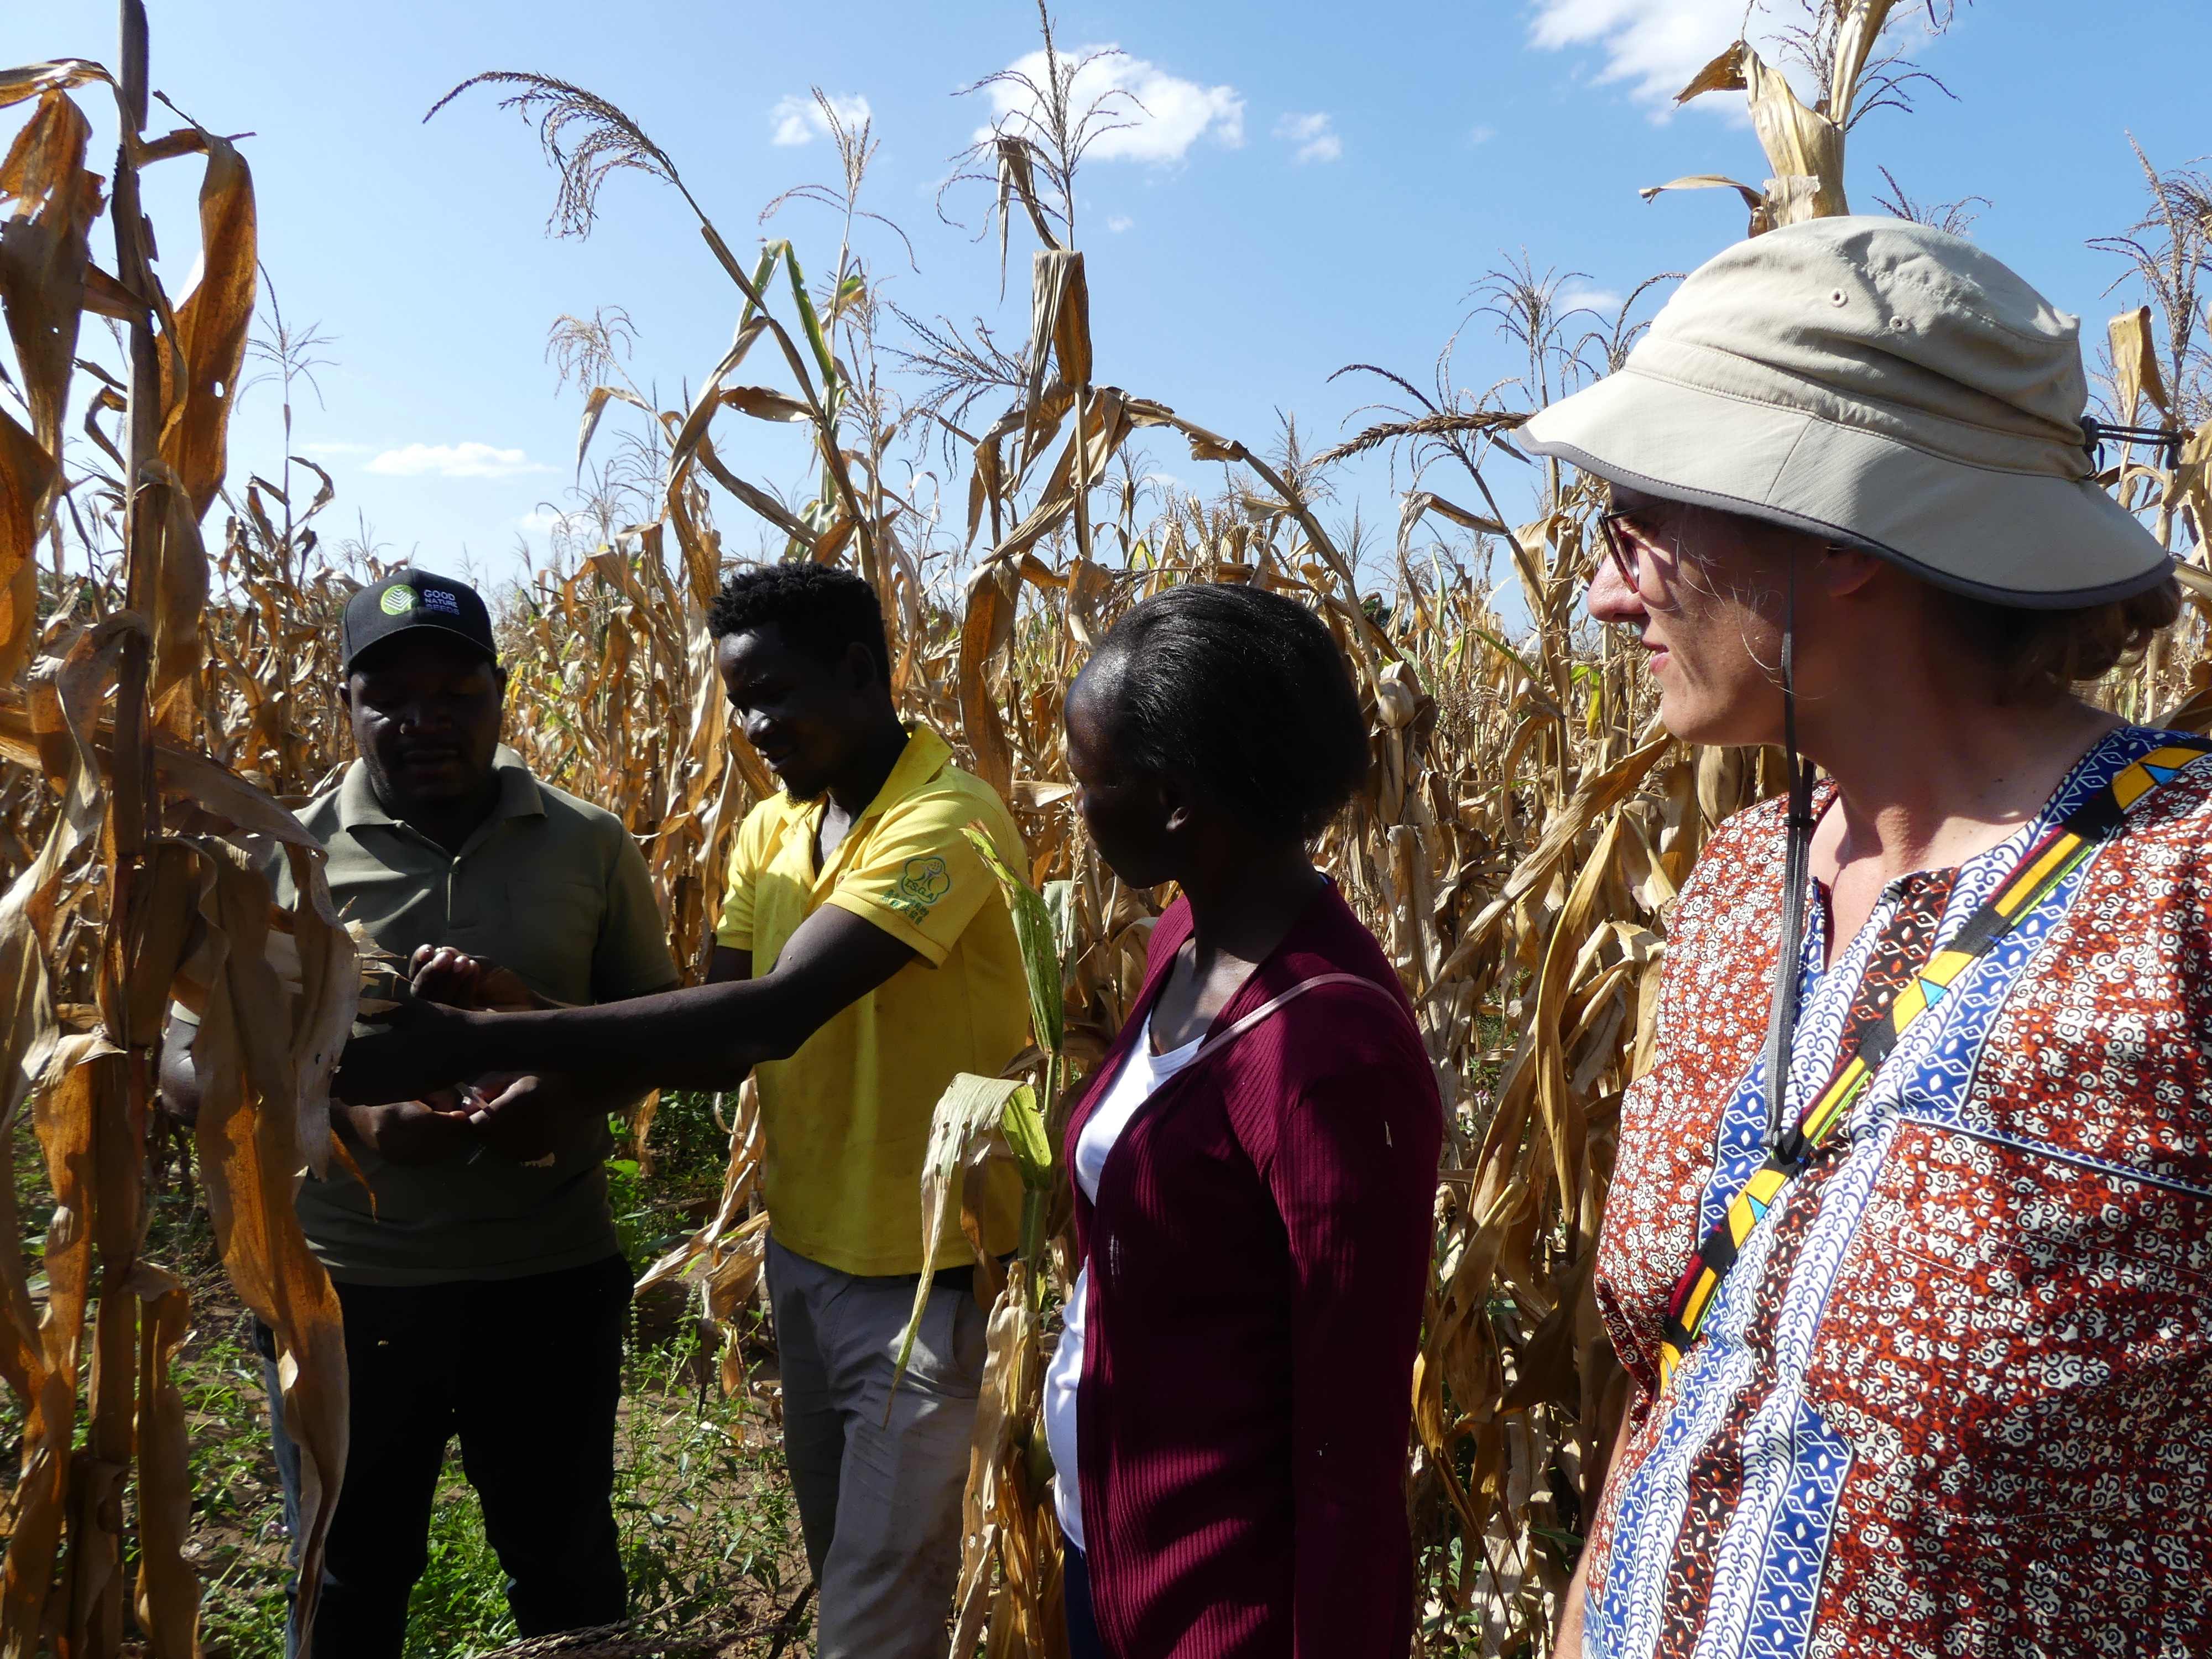 KWS and local farmer team discussing in the on-trial station